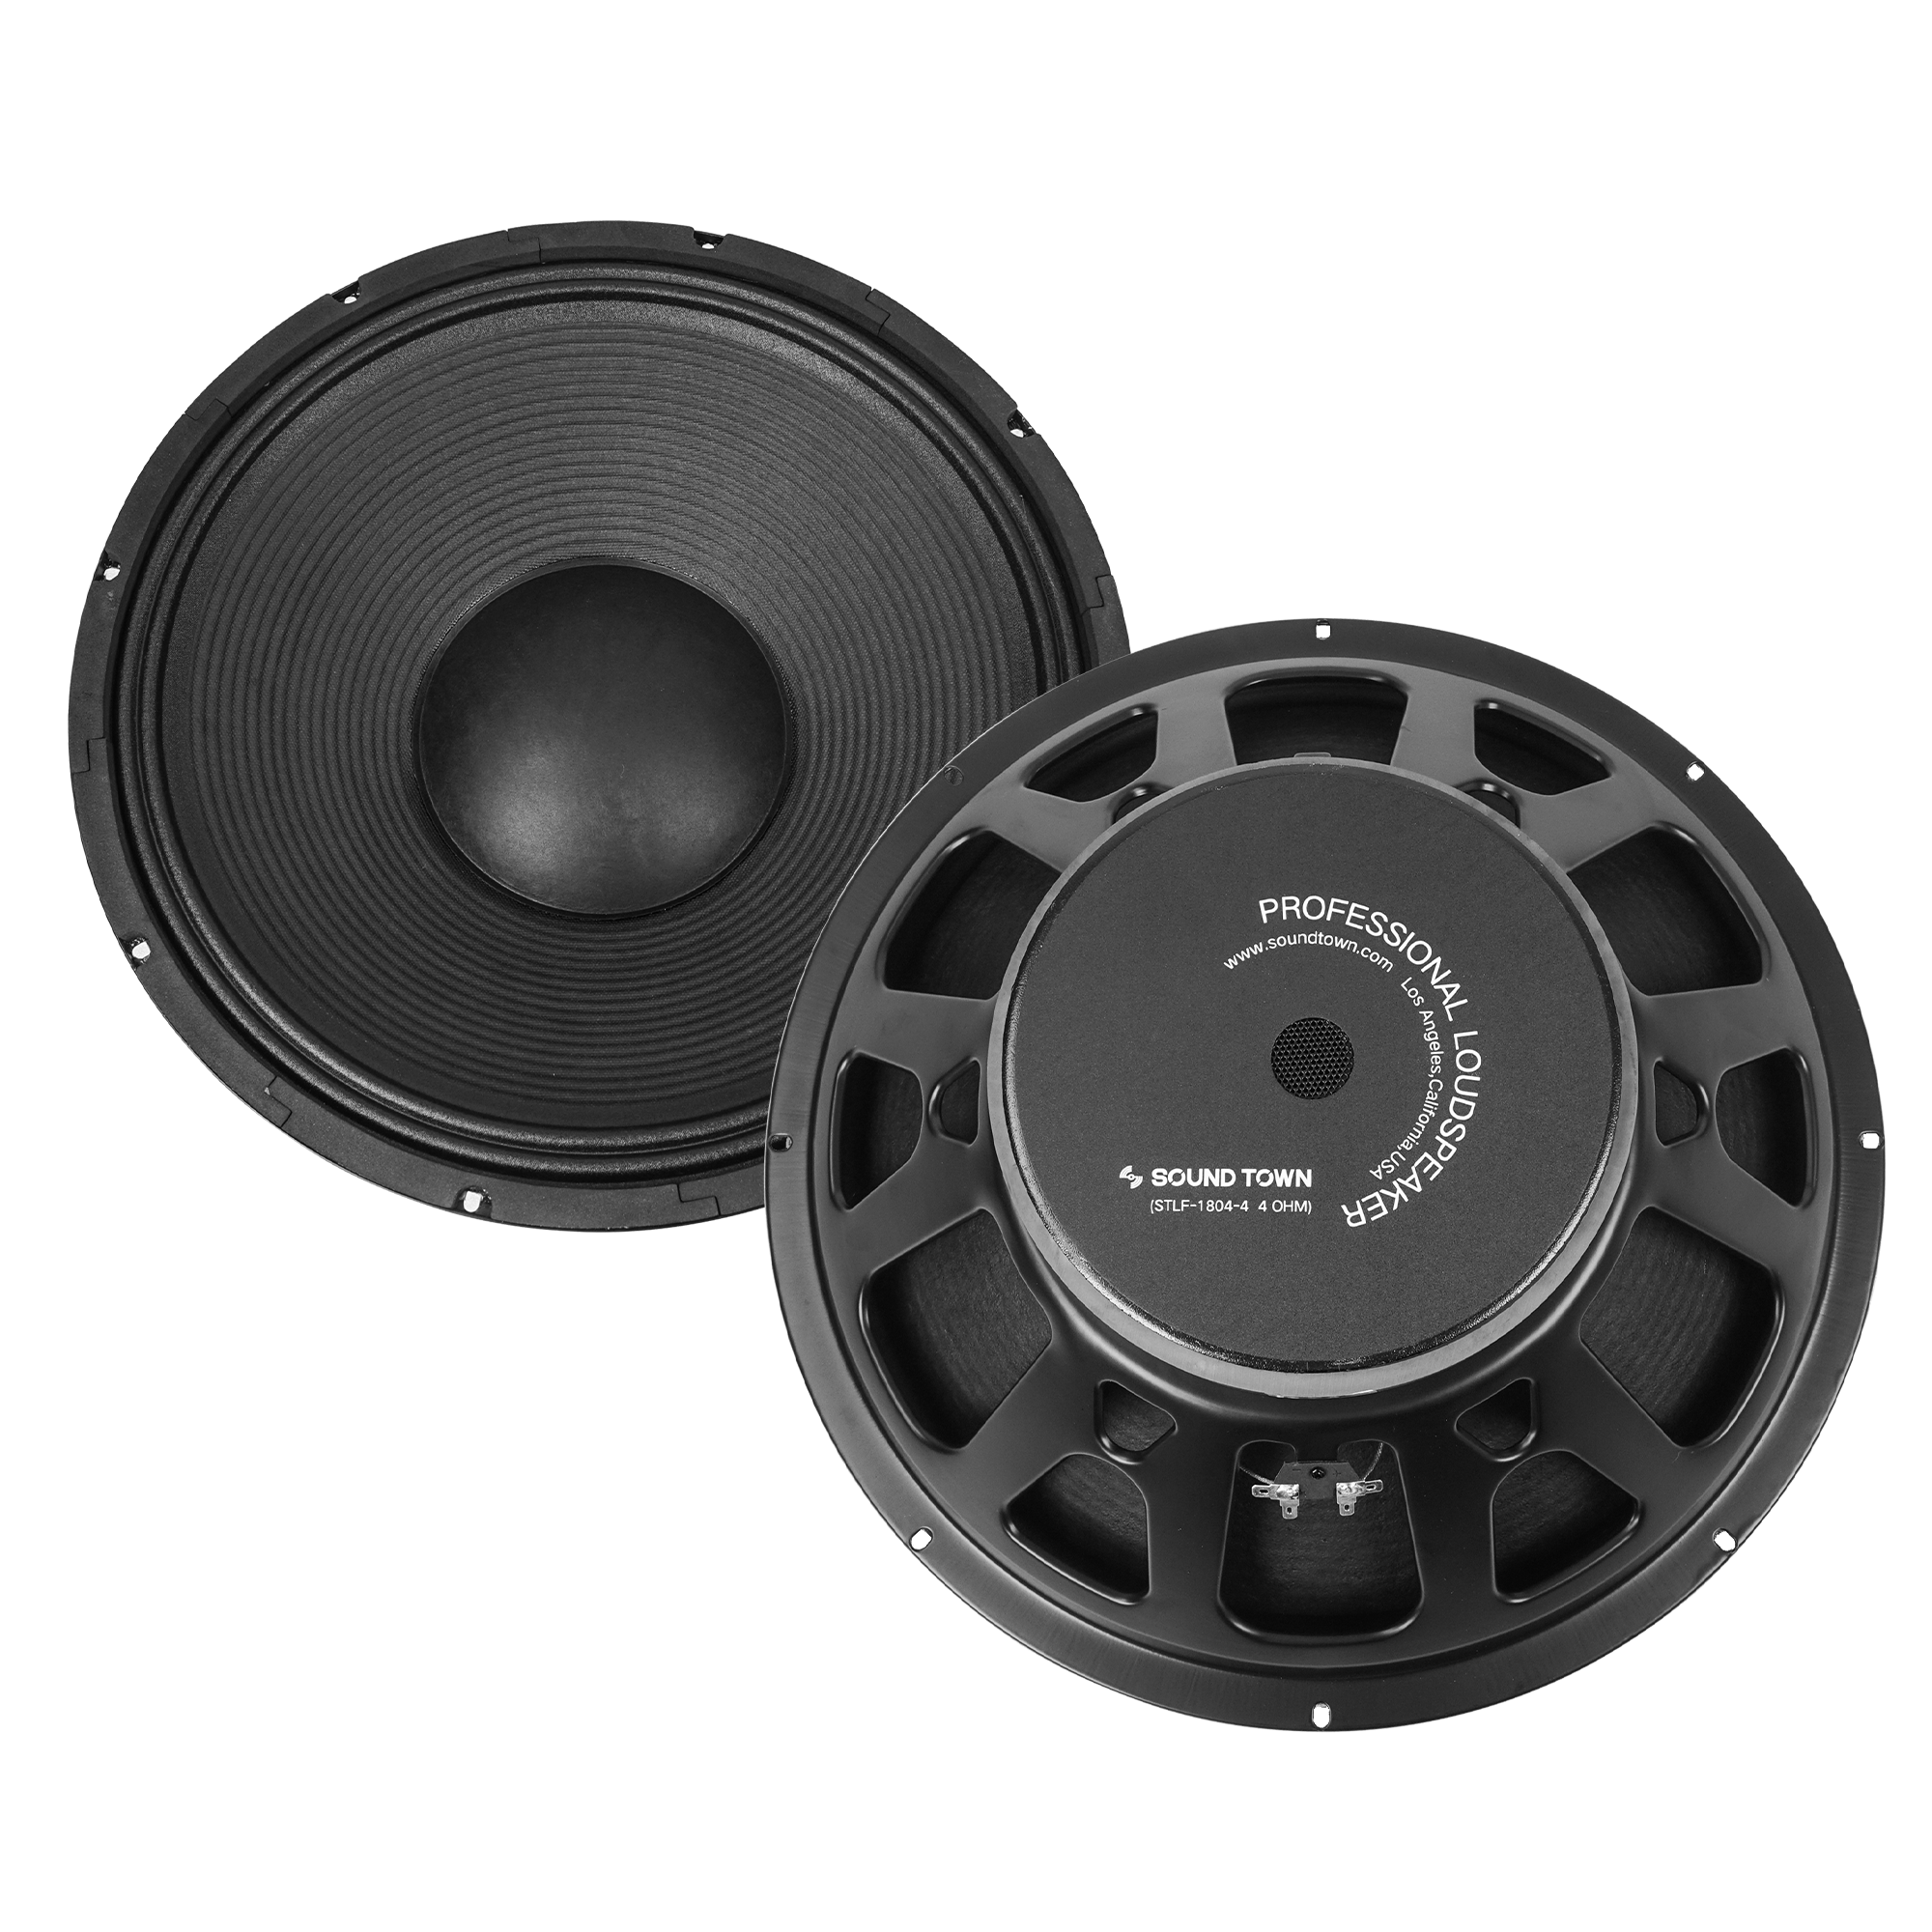 Sound Town STLF-1804-4 18" 450W Raw Woofer Speaker with 4" Voice Coil, 100 oz Magnet, Replacement for PA/DJ Subwoofer, 4-ohm - 18-inches pressed steel chassis with paper cone and cloth edge